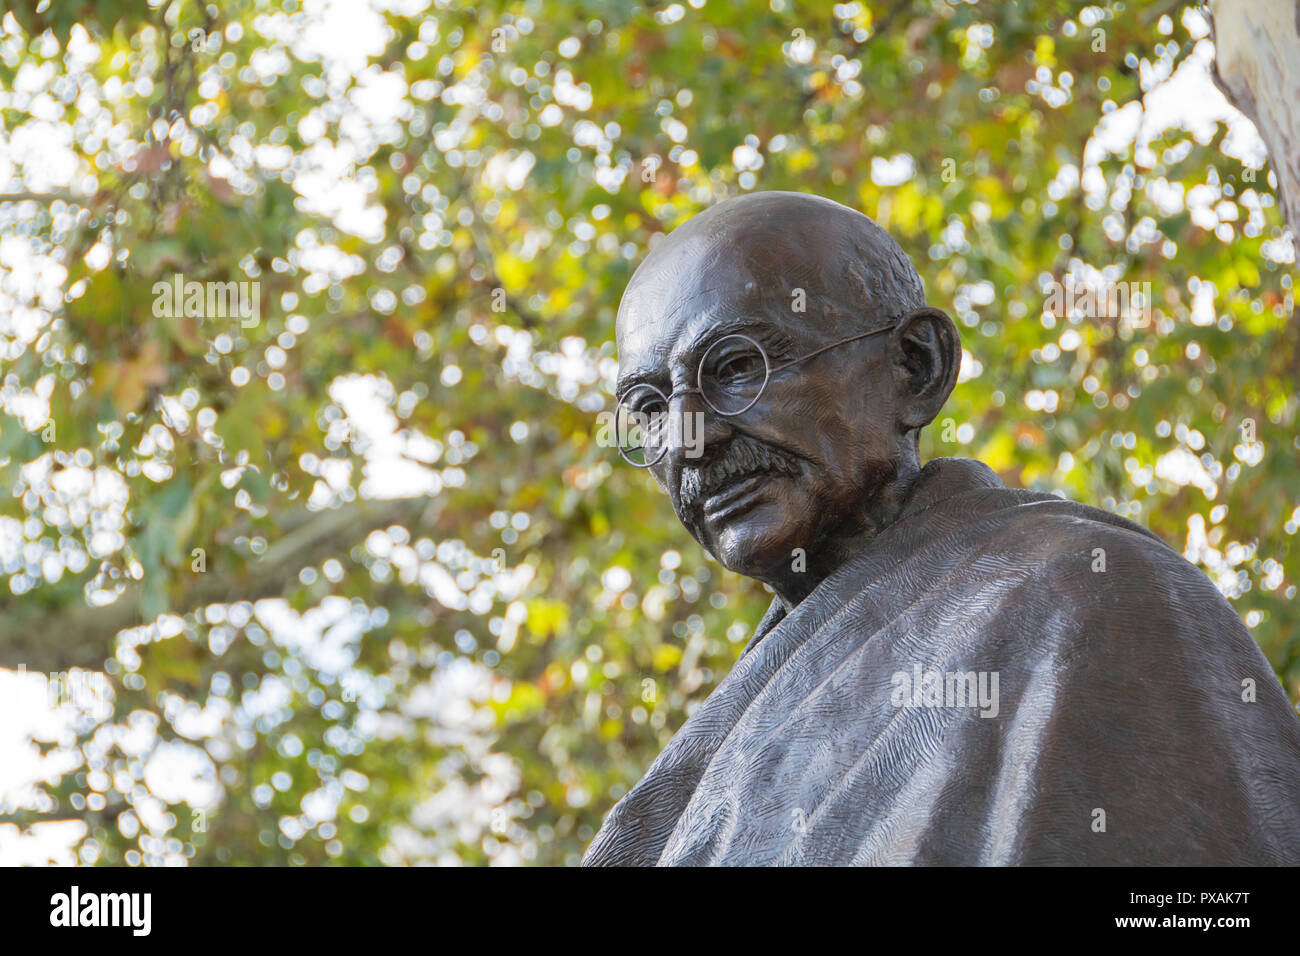 A bronze statue of Mahatma Gandhi in Parliament Square, Westminster, London, by the sculptor Philip Jackson. Stock Photo